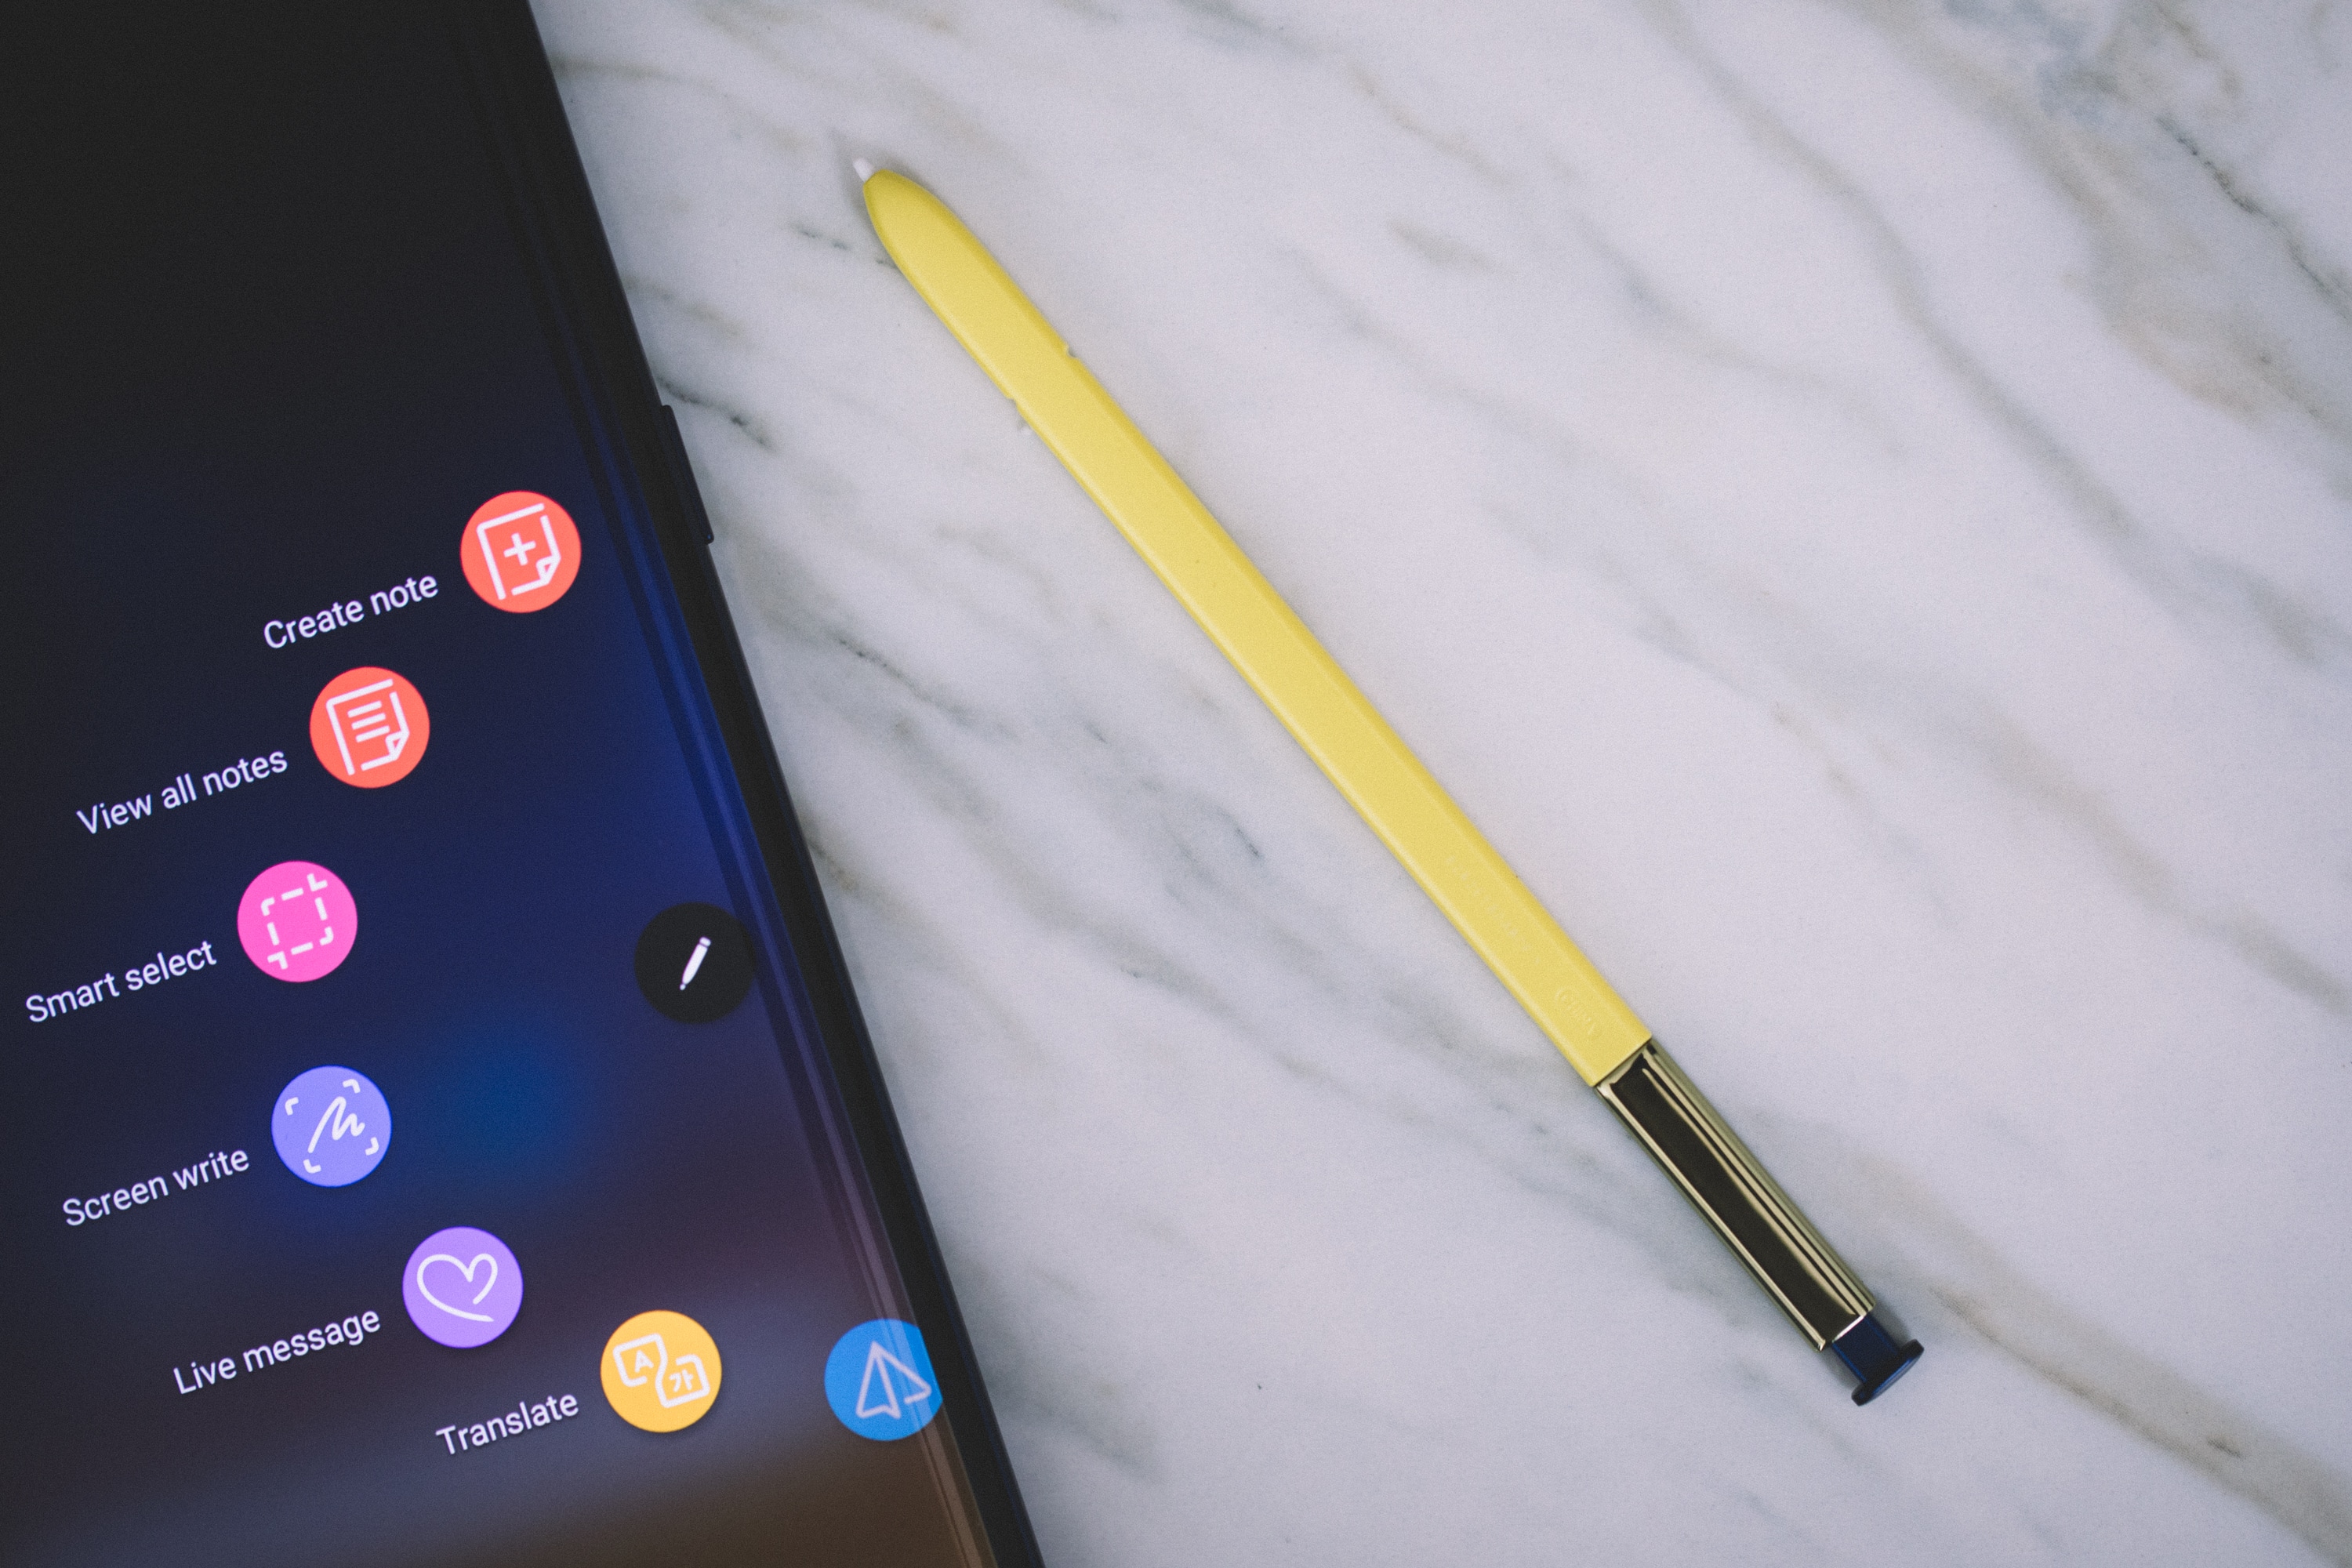 Will you buy the new Samsung Note 8 to take digital notes? - Good